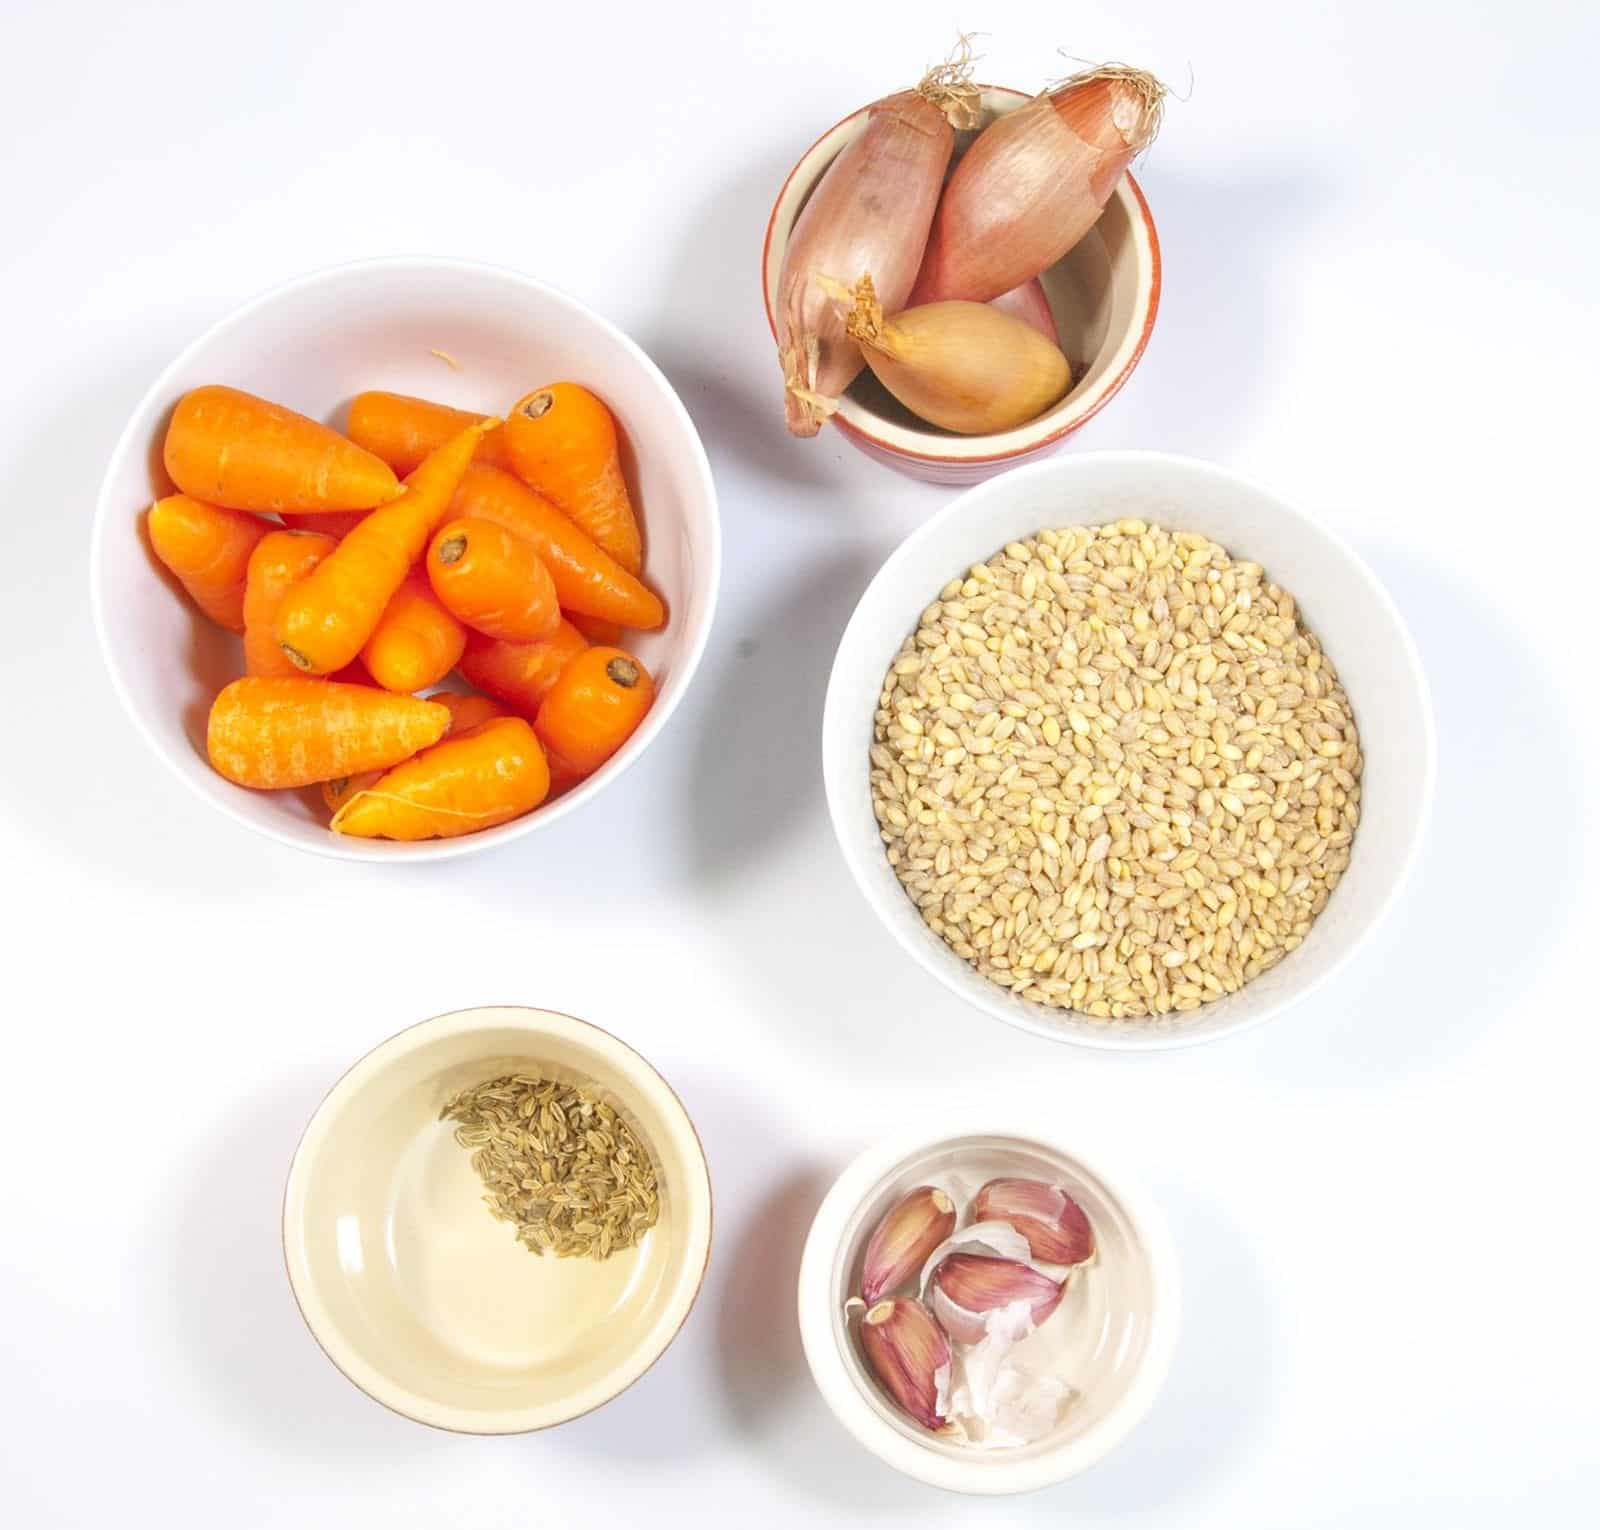 Gather the ingredients together for the salad | https://theyumyumclub.com/2019/04/22/braised-carrot-pearl-barley-salad/